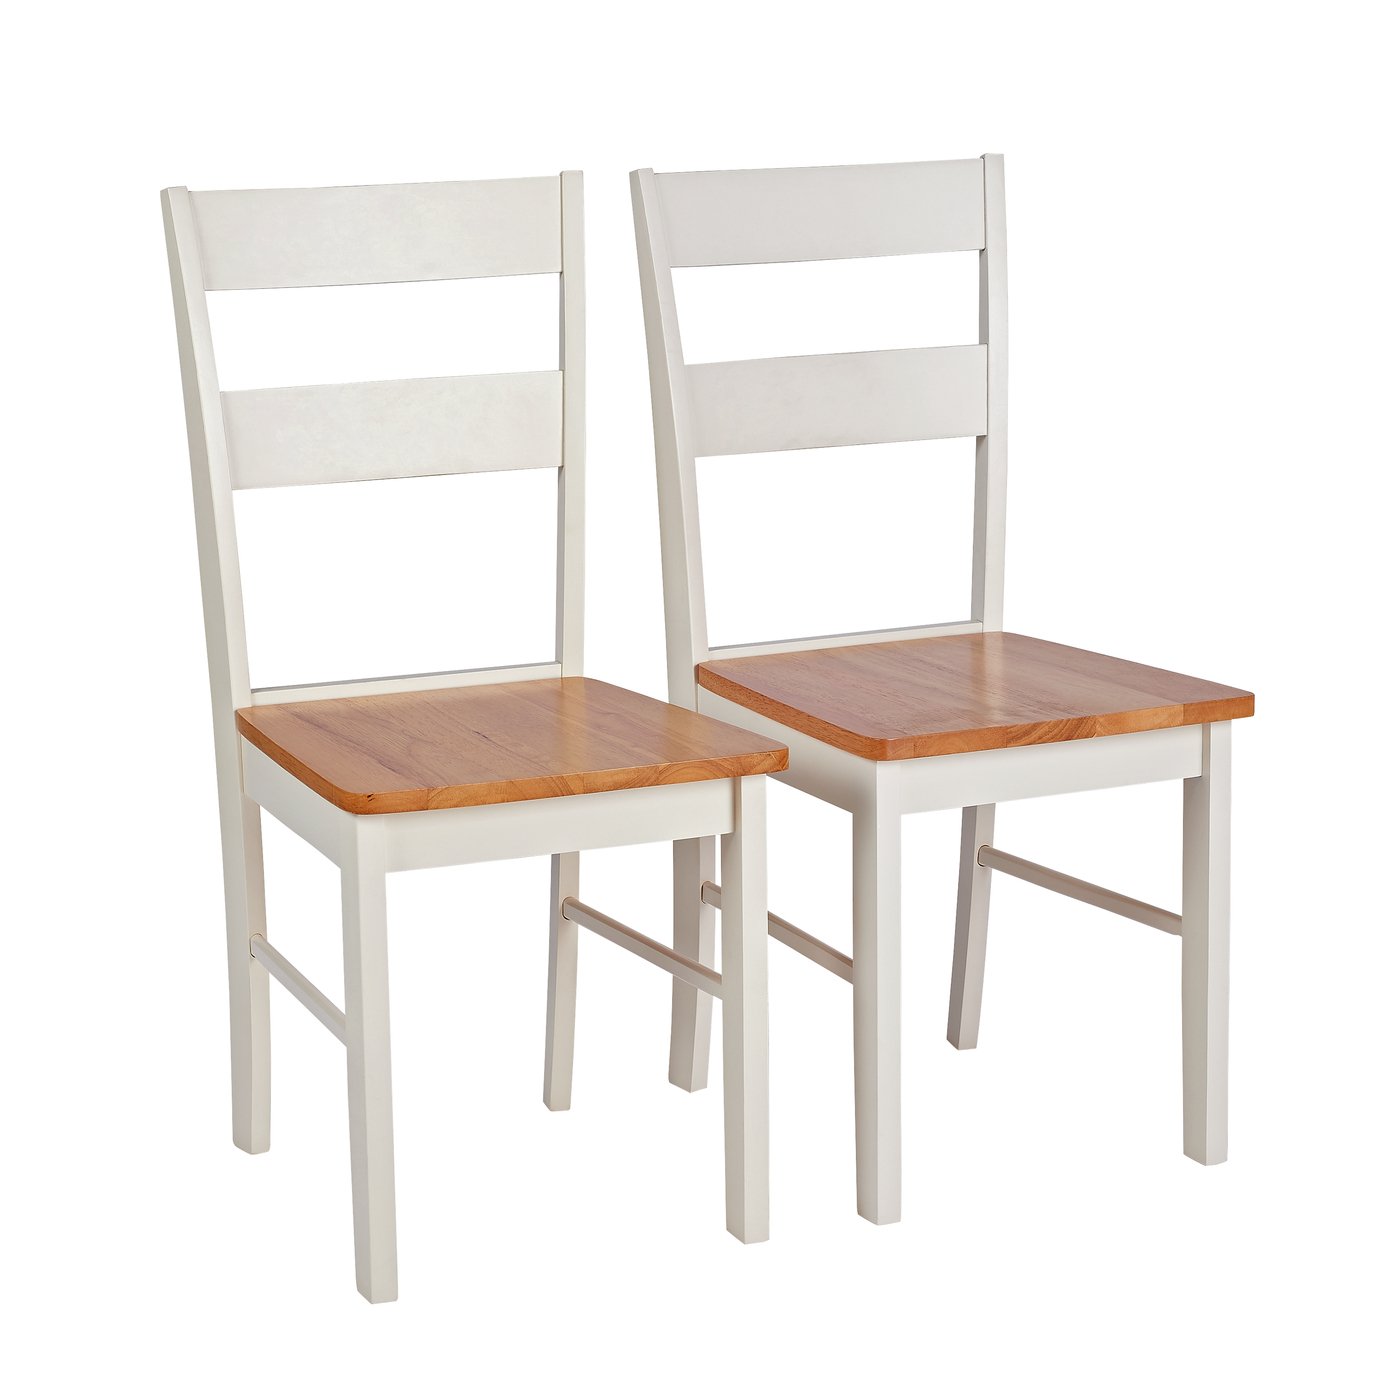 Habitat Chicago Pair of Dining Chairs - Two Tone